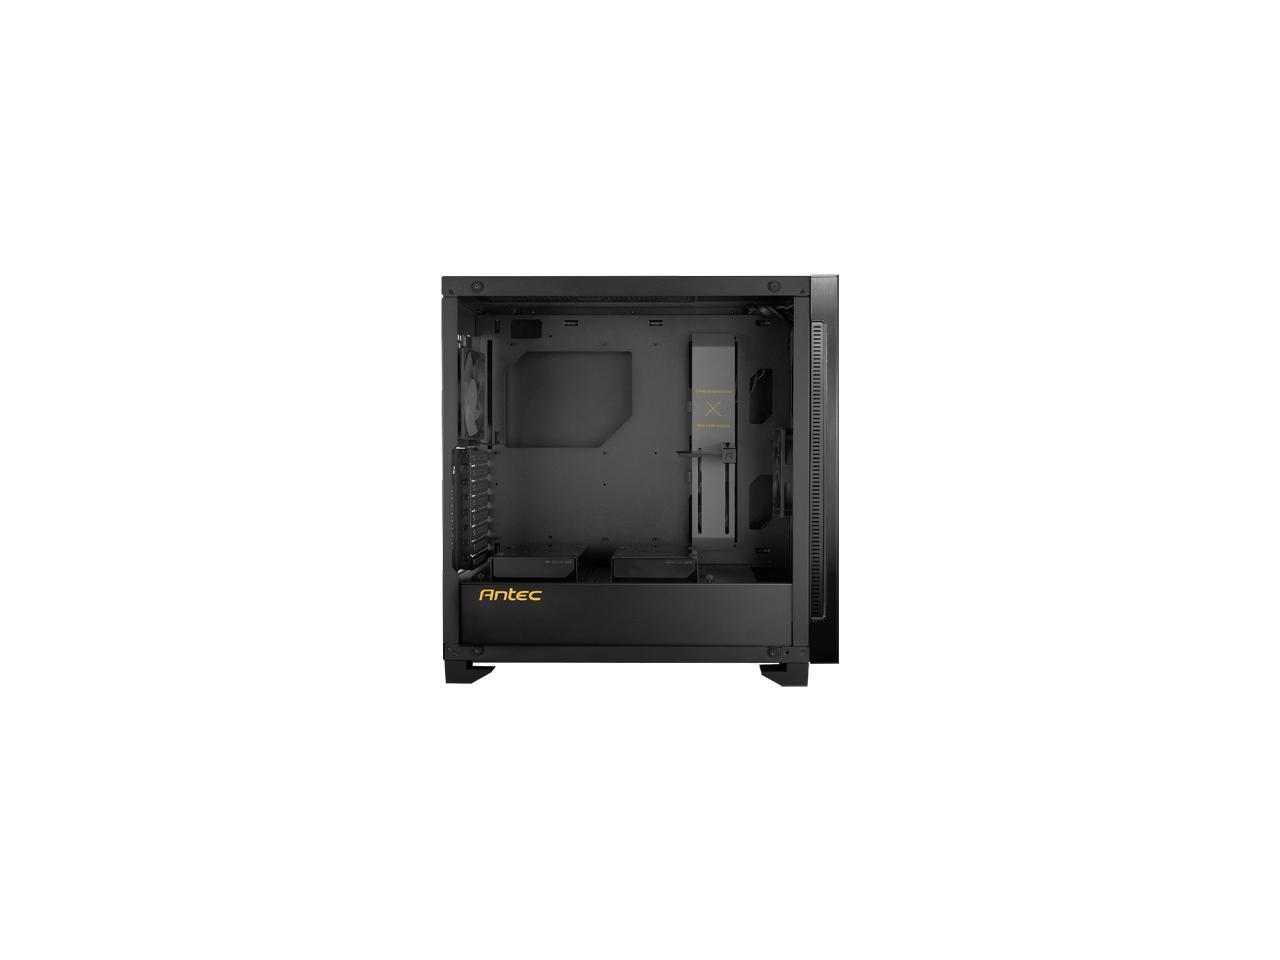 Antec Performance Series P110 Silent Mid-Tower Computer Case, Sound Dampening Side Panel, 8 Drive Bays, VR Ready/Vertical VGA Card Support, 2 x 120mm Fans Pre-Installed